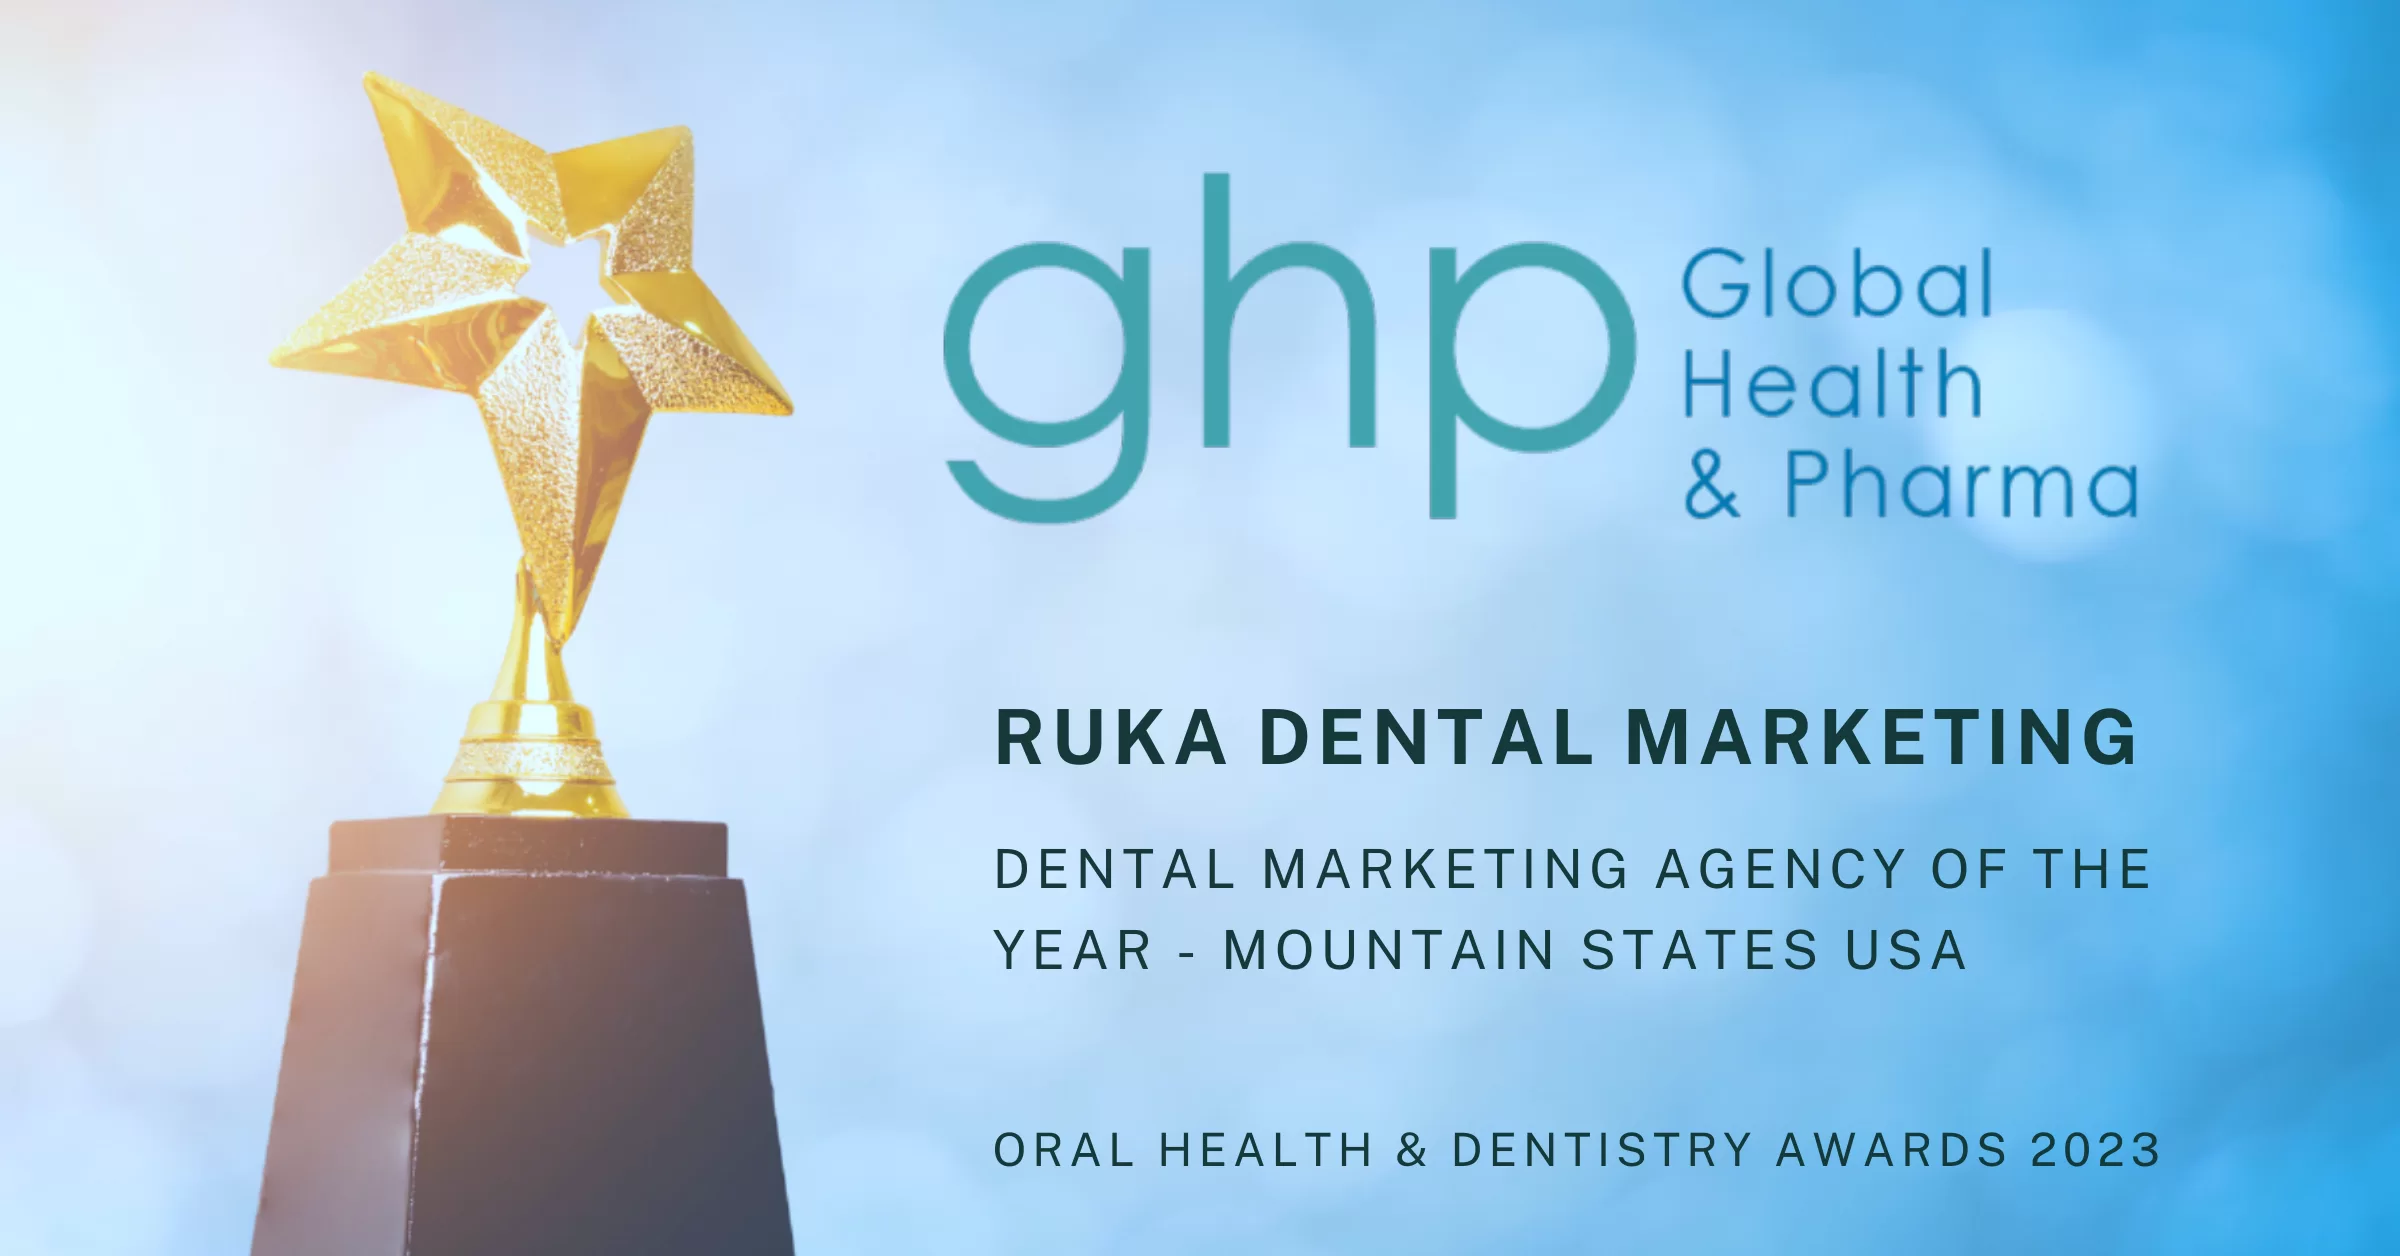 Ruka Dental Marketing wins Dentistry Awards, recognized as the mountain agency of the USA.